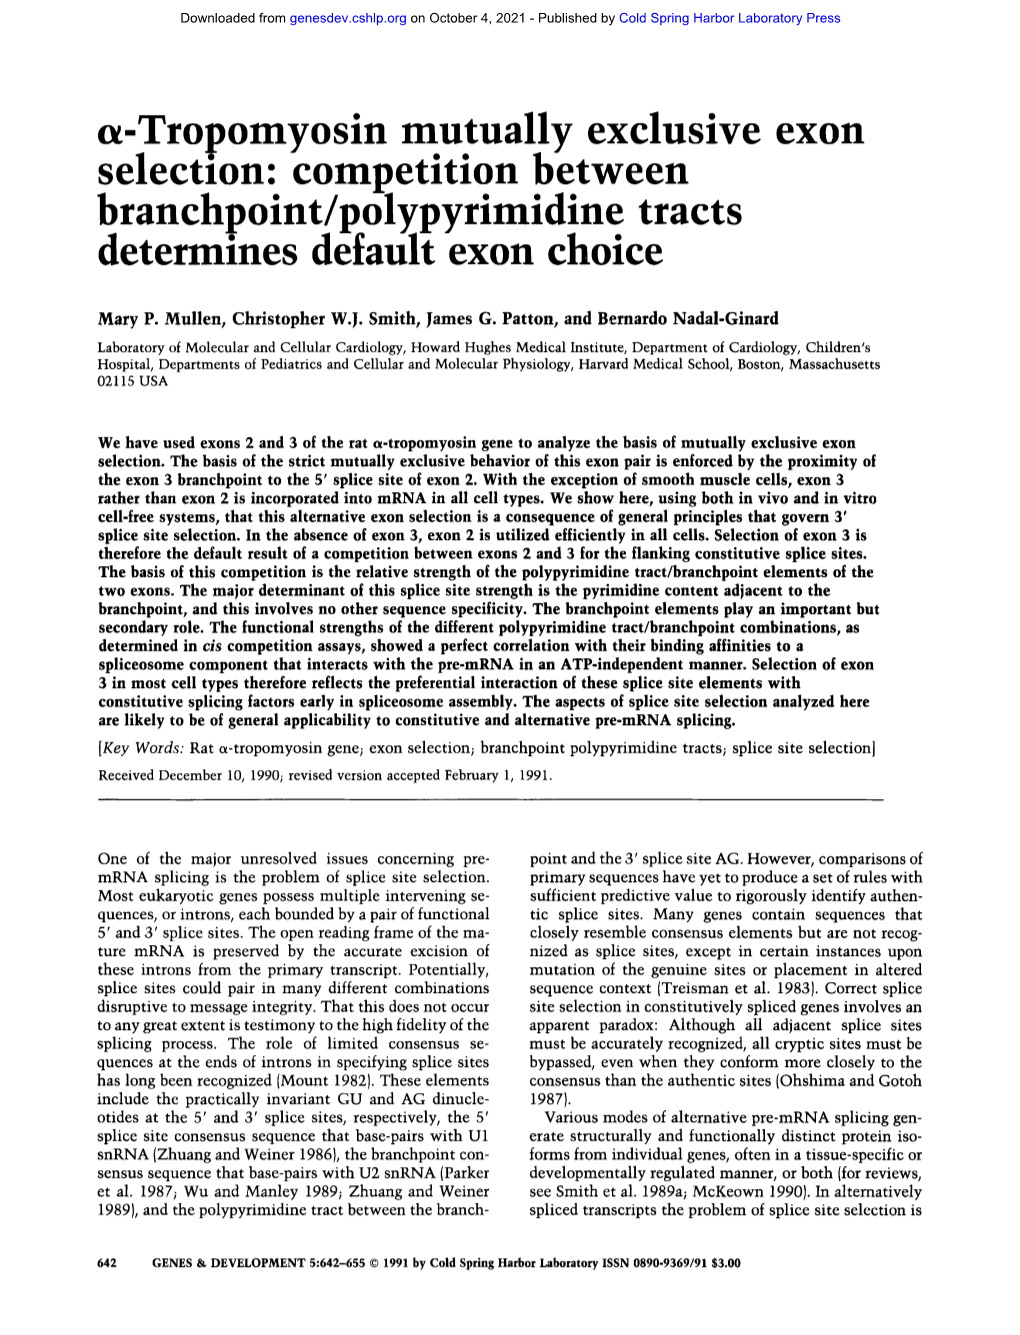 Tropomyosin Mutually Exclusive Exon Selection, Competition Between Branchpolnt/Polypynmidine Tracts Determines Default Exon Choice